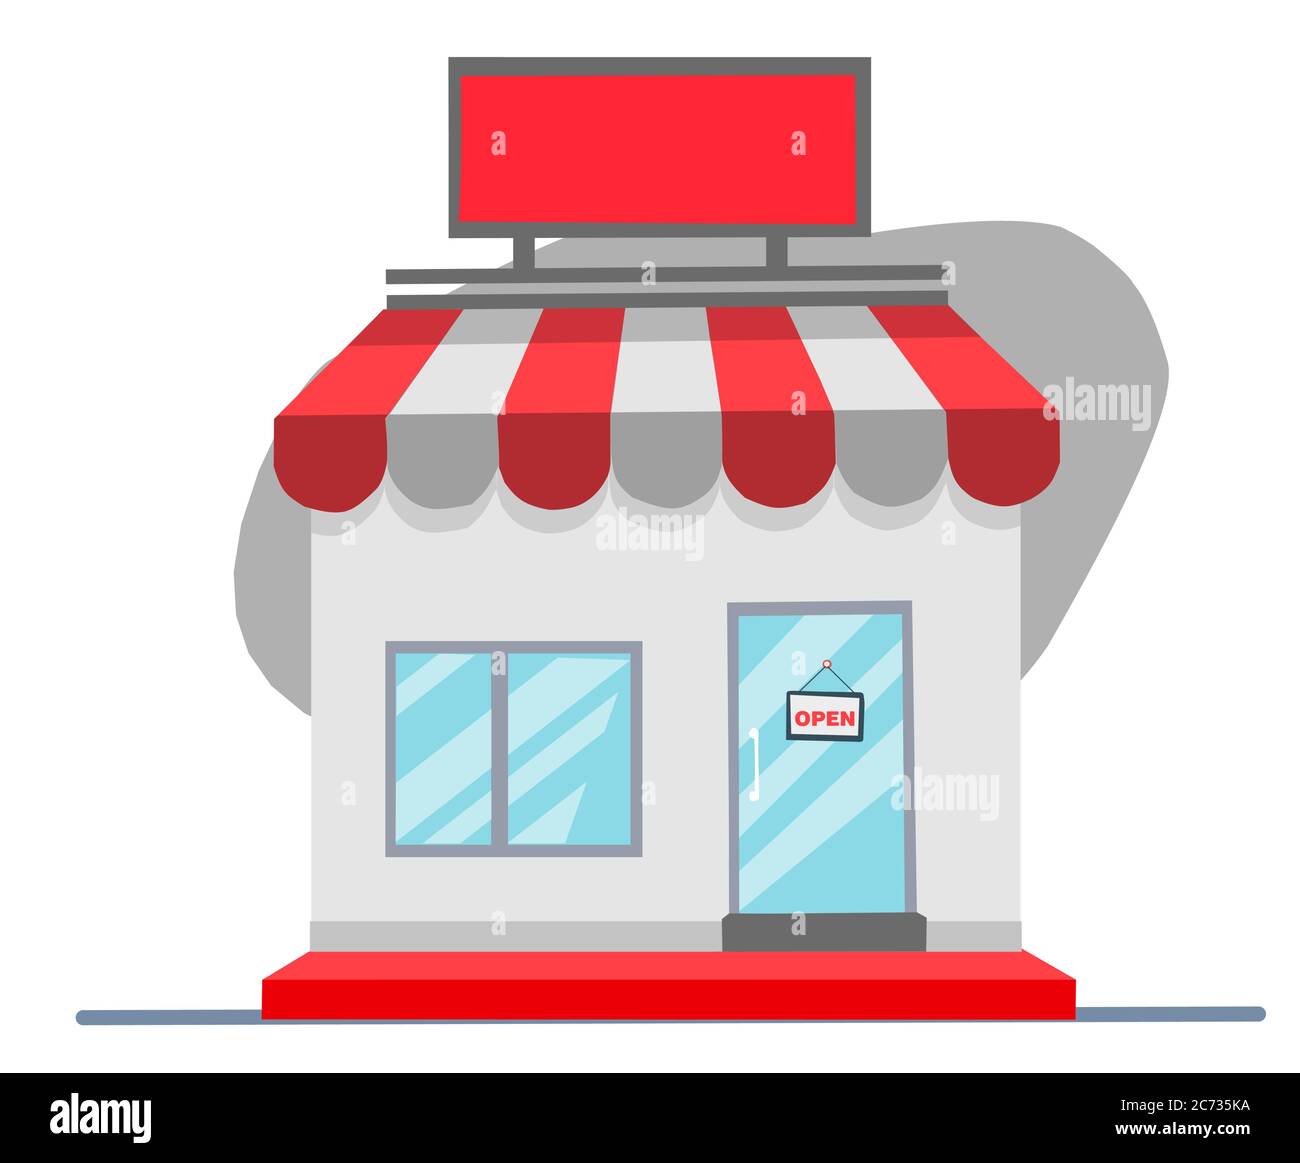 store retail facade flat design illustration isolated on white background, ecommerce business concept Stock Vector